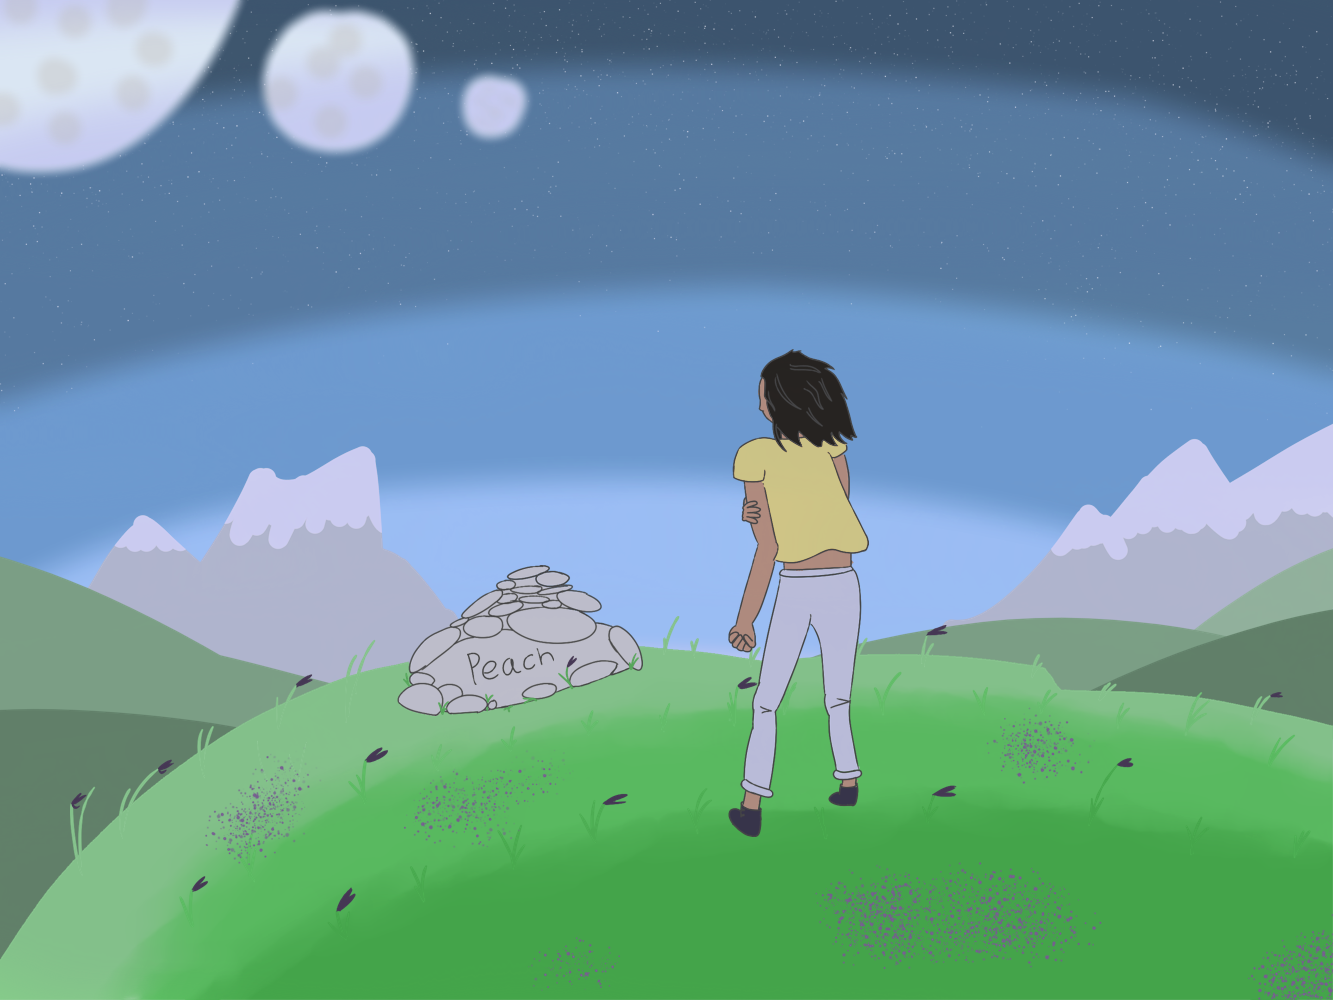 A person overlooking a pile of rocks on the edge of a cliff, the pile has the word "Peach" etched into it. There are three moons in the evening sky.Jun 03 2022